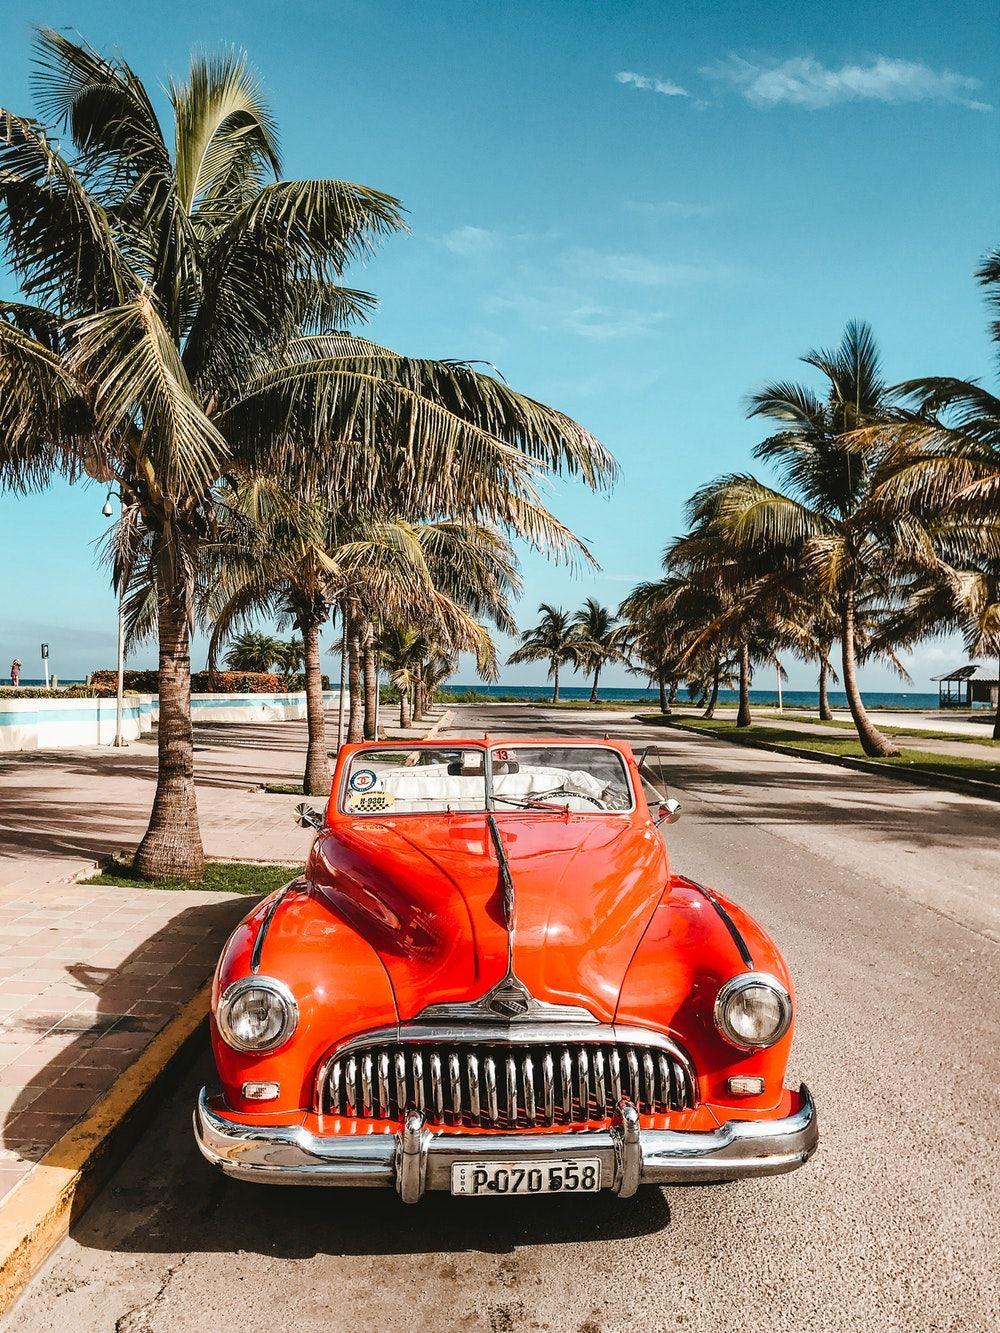 Cars In Cuba Wallpapers Top Free Cars In Cuba Backgrounds Wallpaperaccess